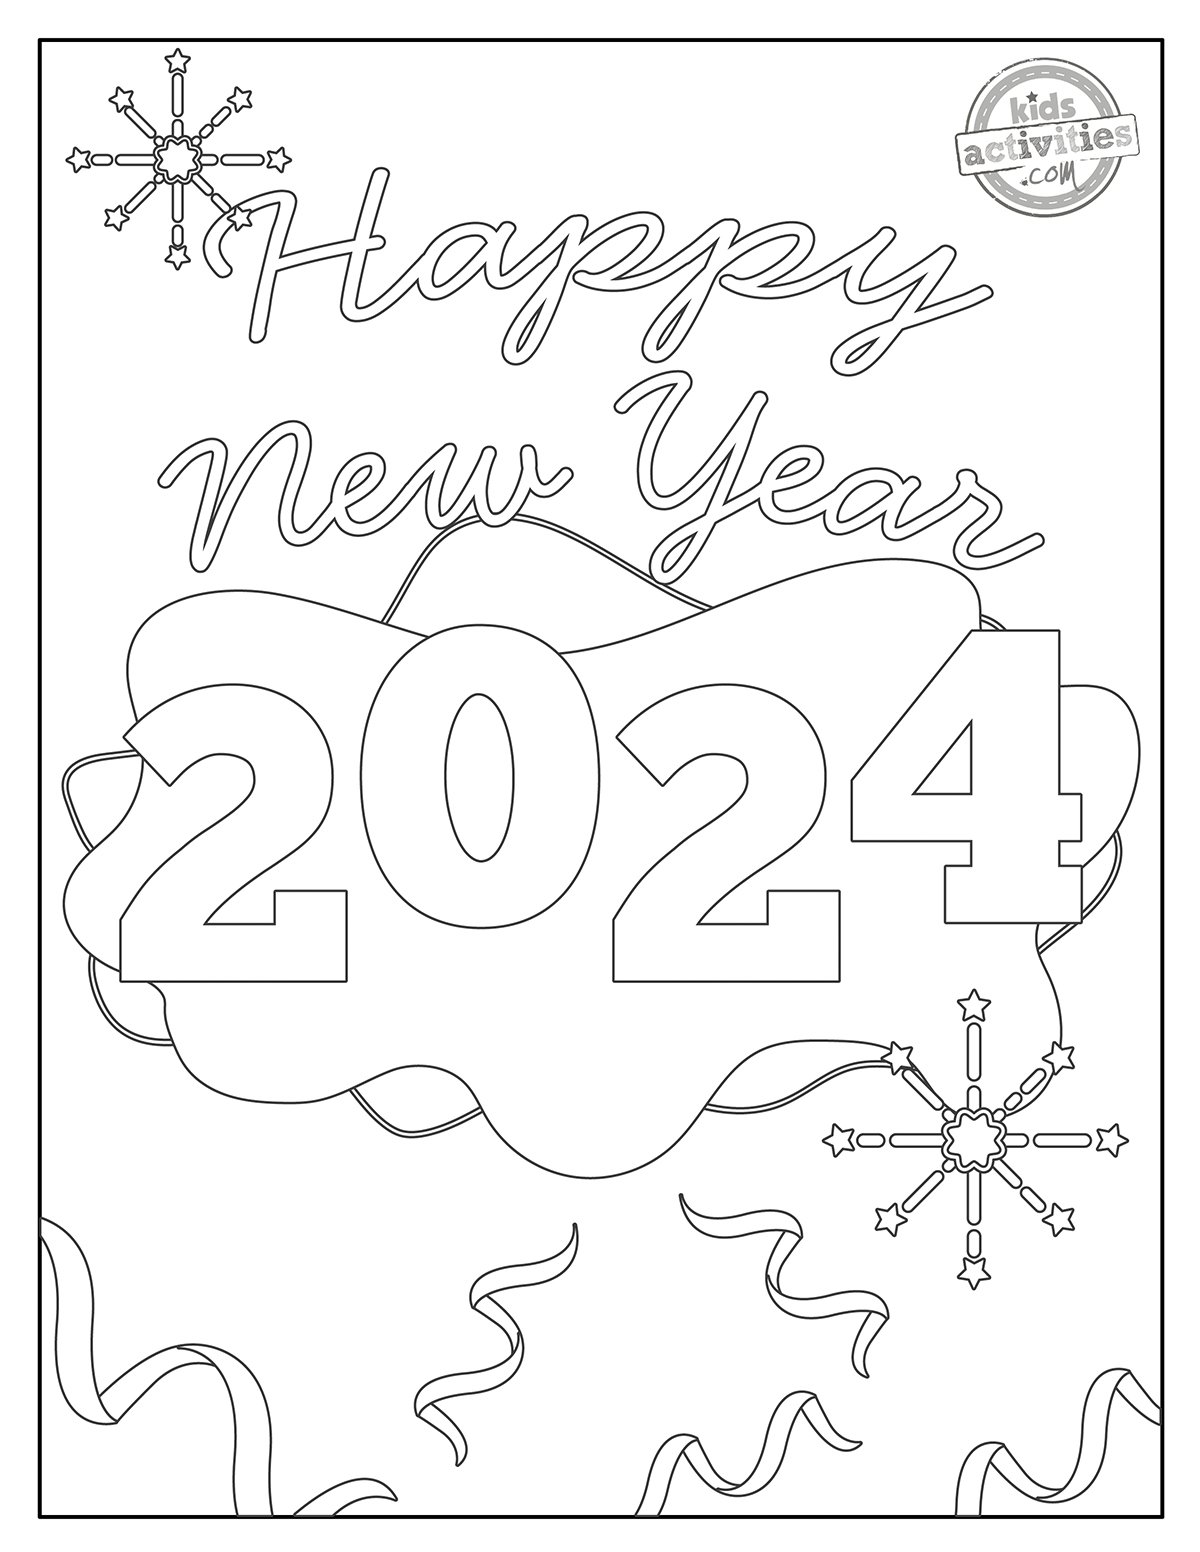 Celebrate Freedom with 4th of July: 180+ Free Coloring Pages 51